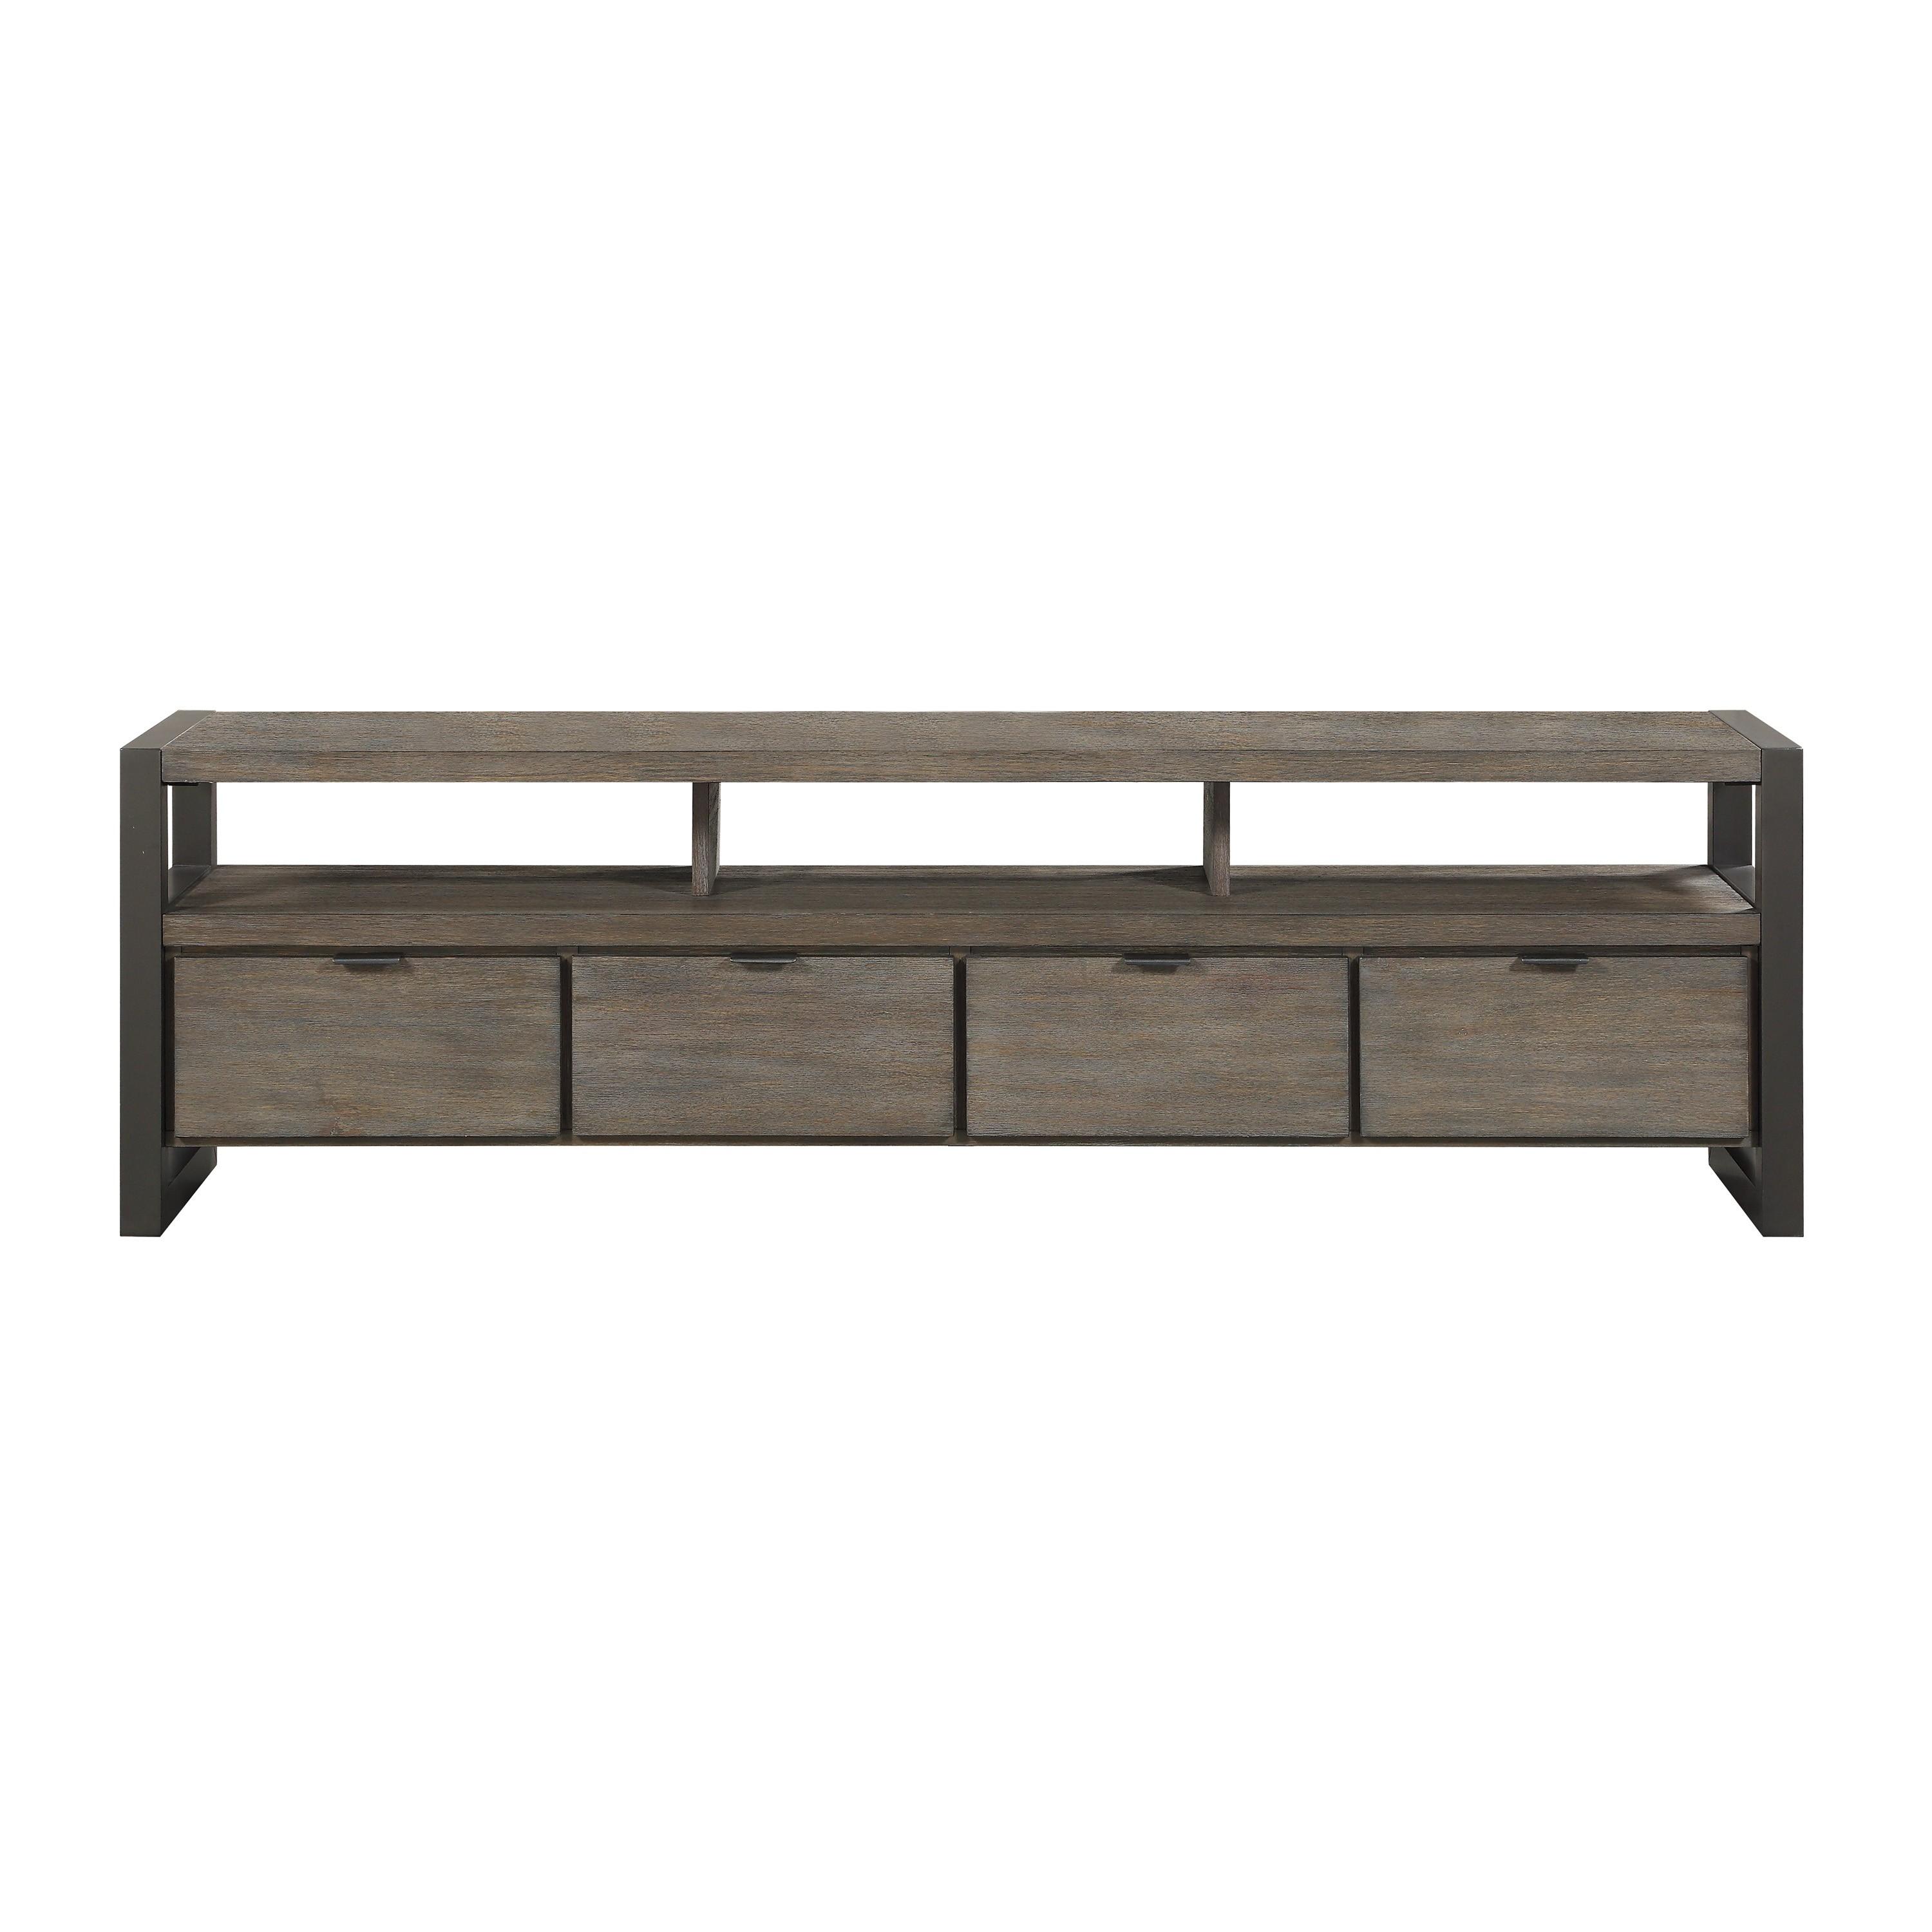 Homelegance 4550-76T Prudhoe TV Stand